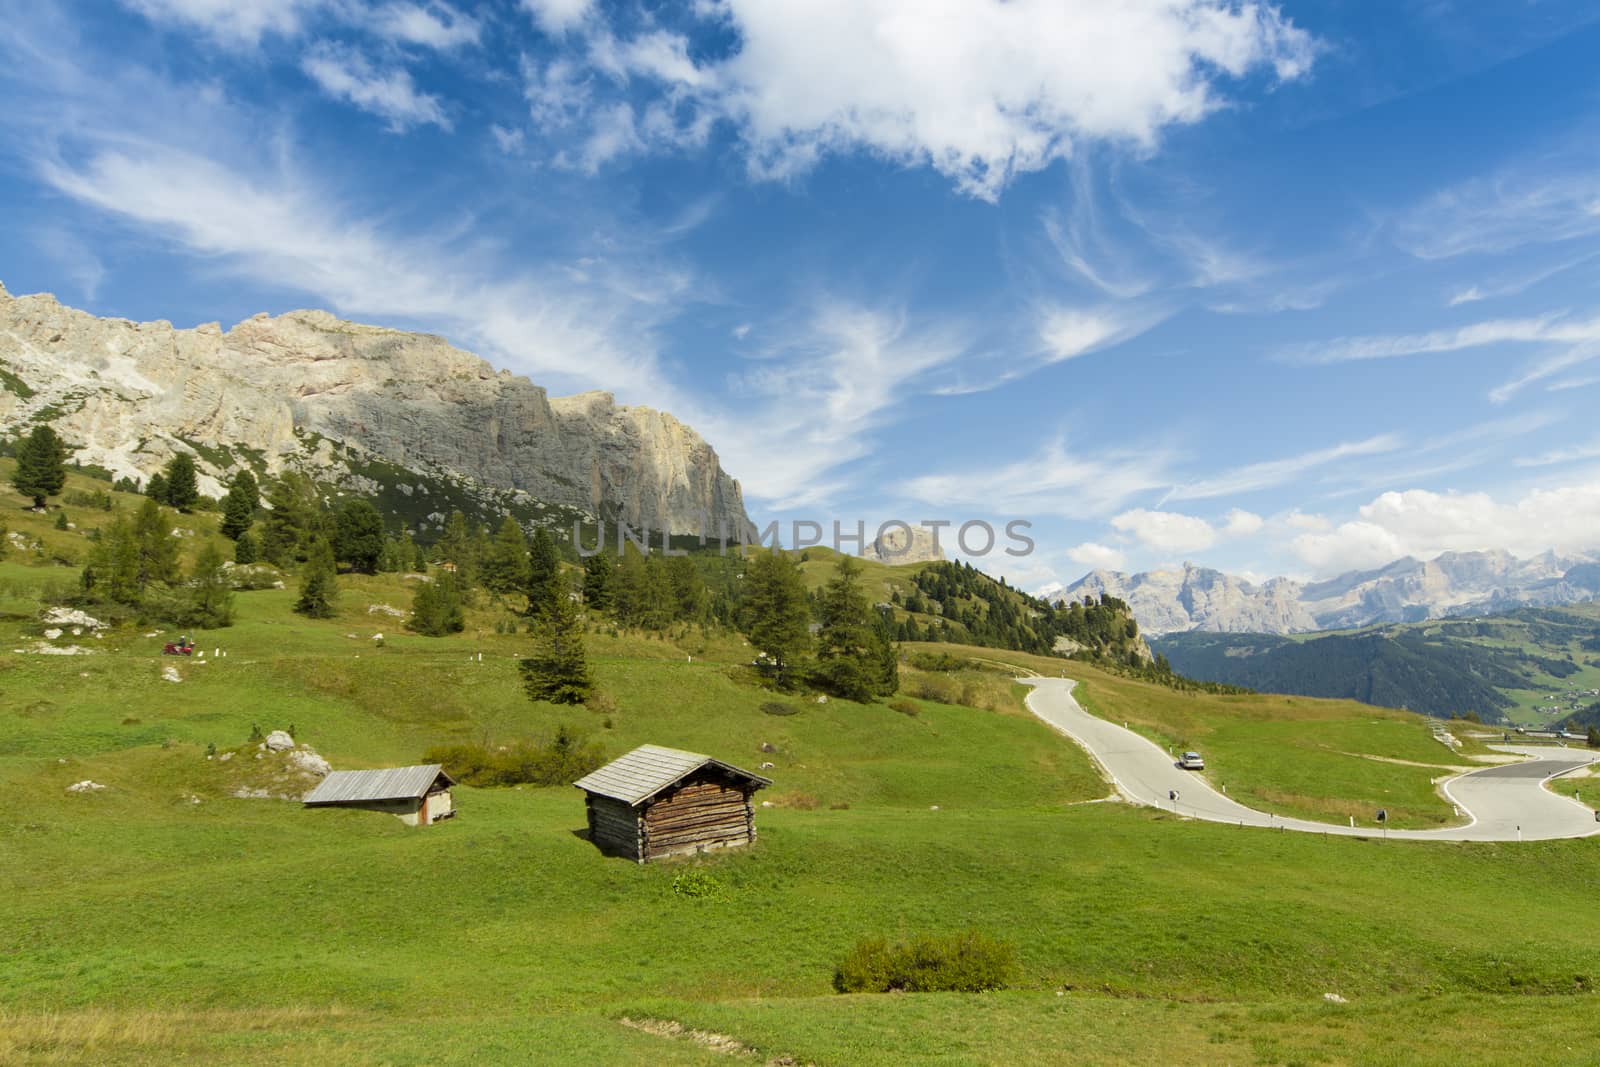 View of a high mountain refuge in a green valley, blue sky and the Dolomite Mountains